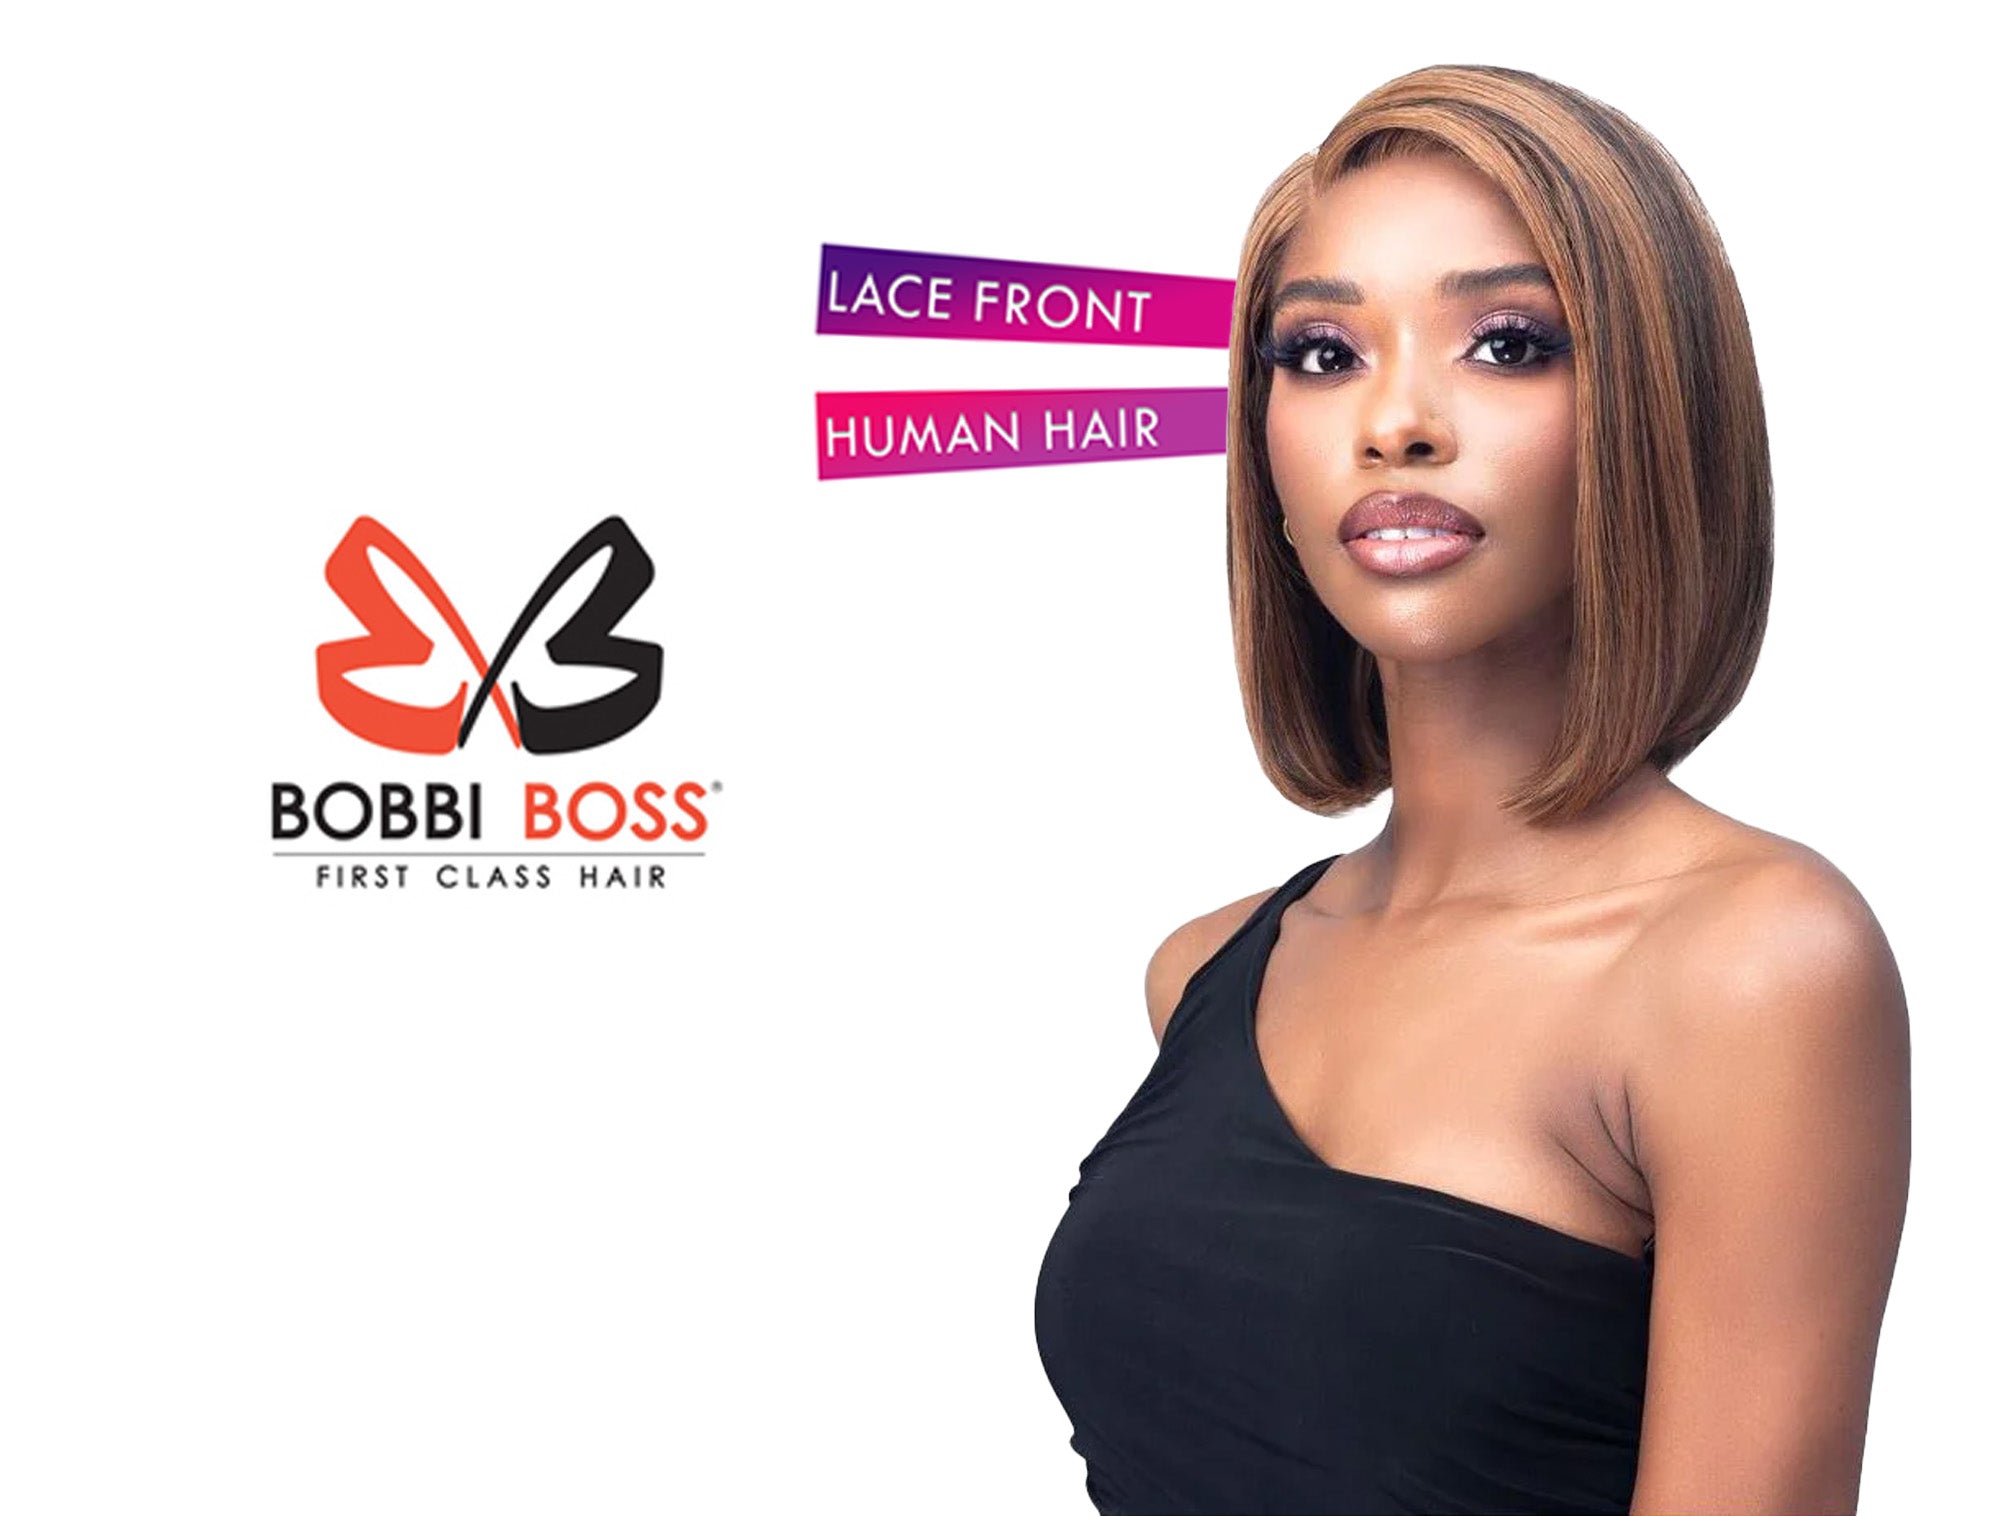 NUTIQUE BEST FRIEND FOREVER LACE WIG- WEDNESDAY 28